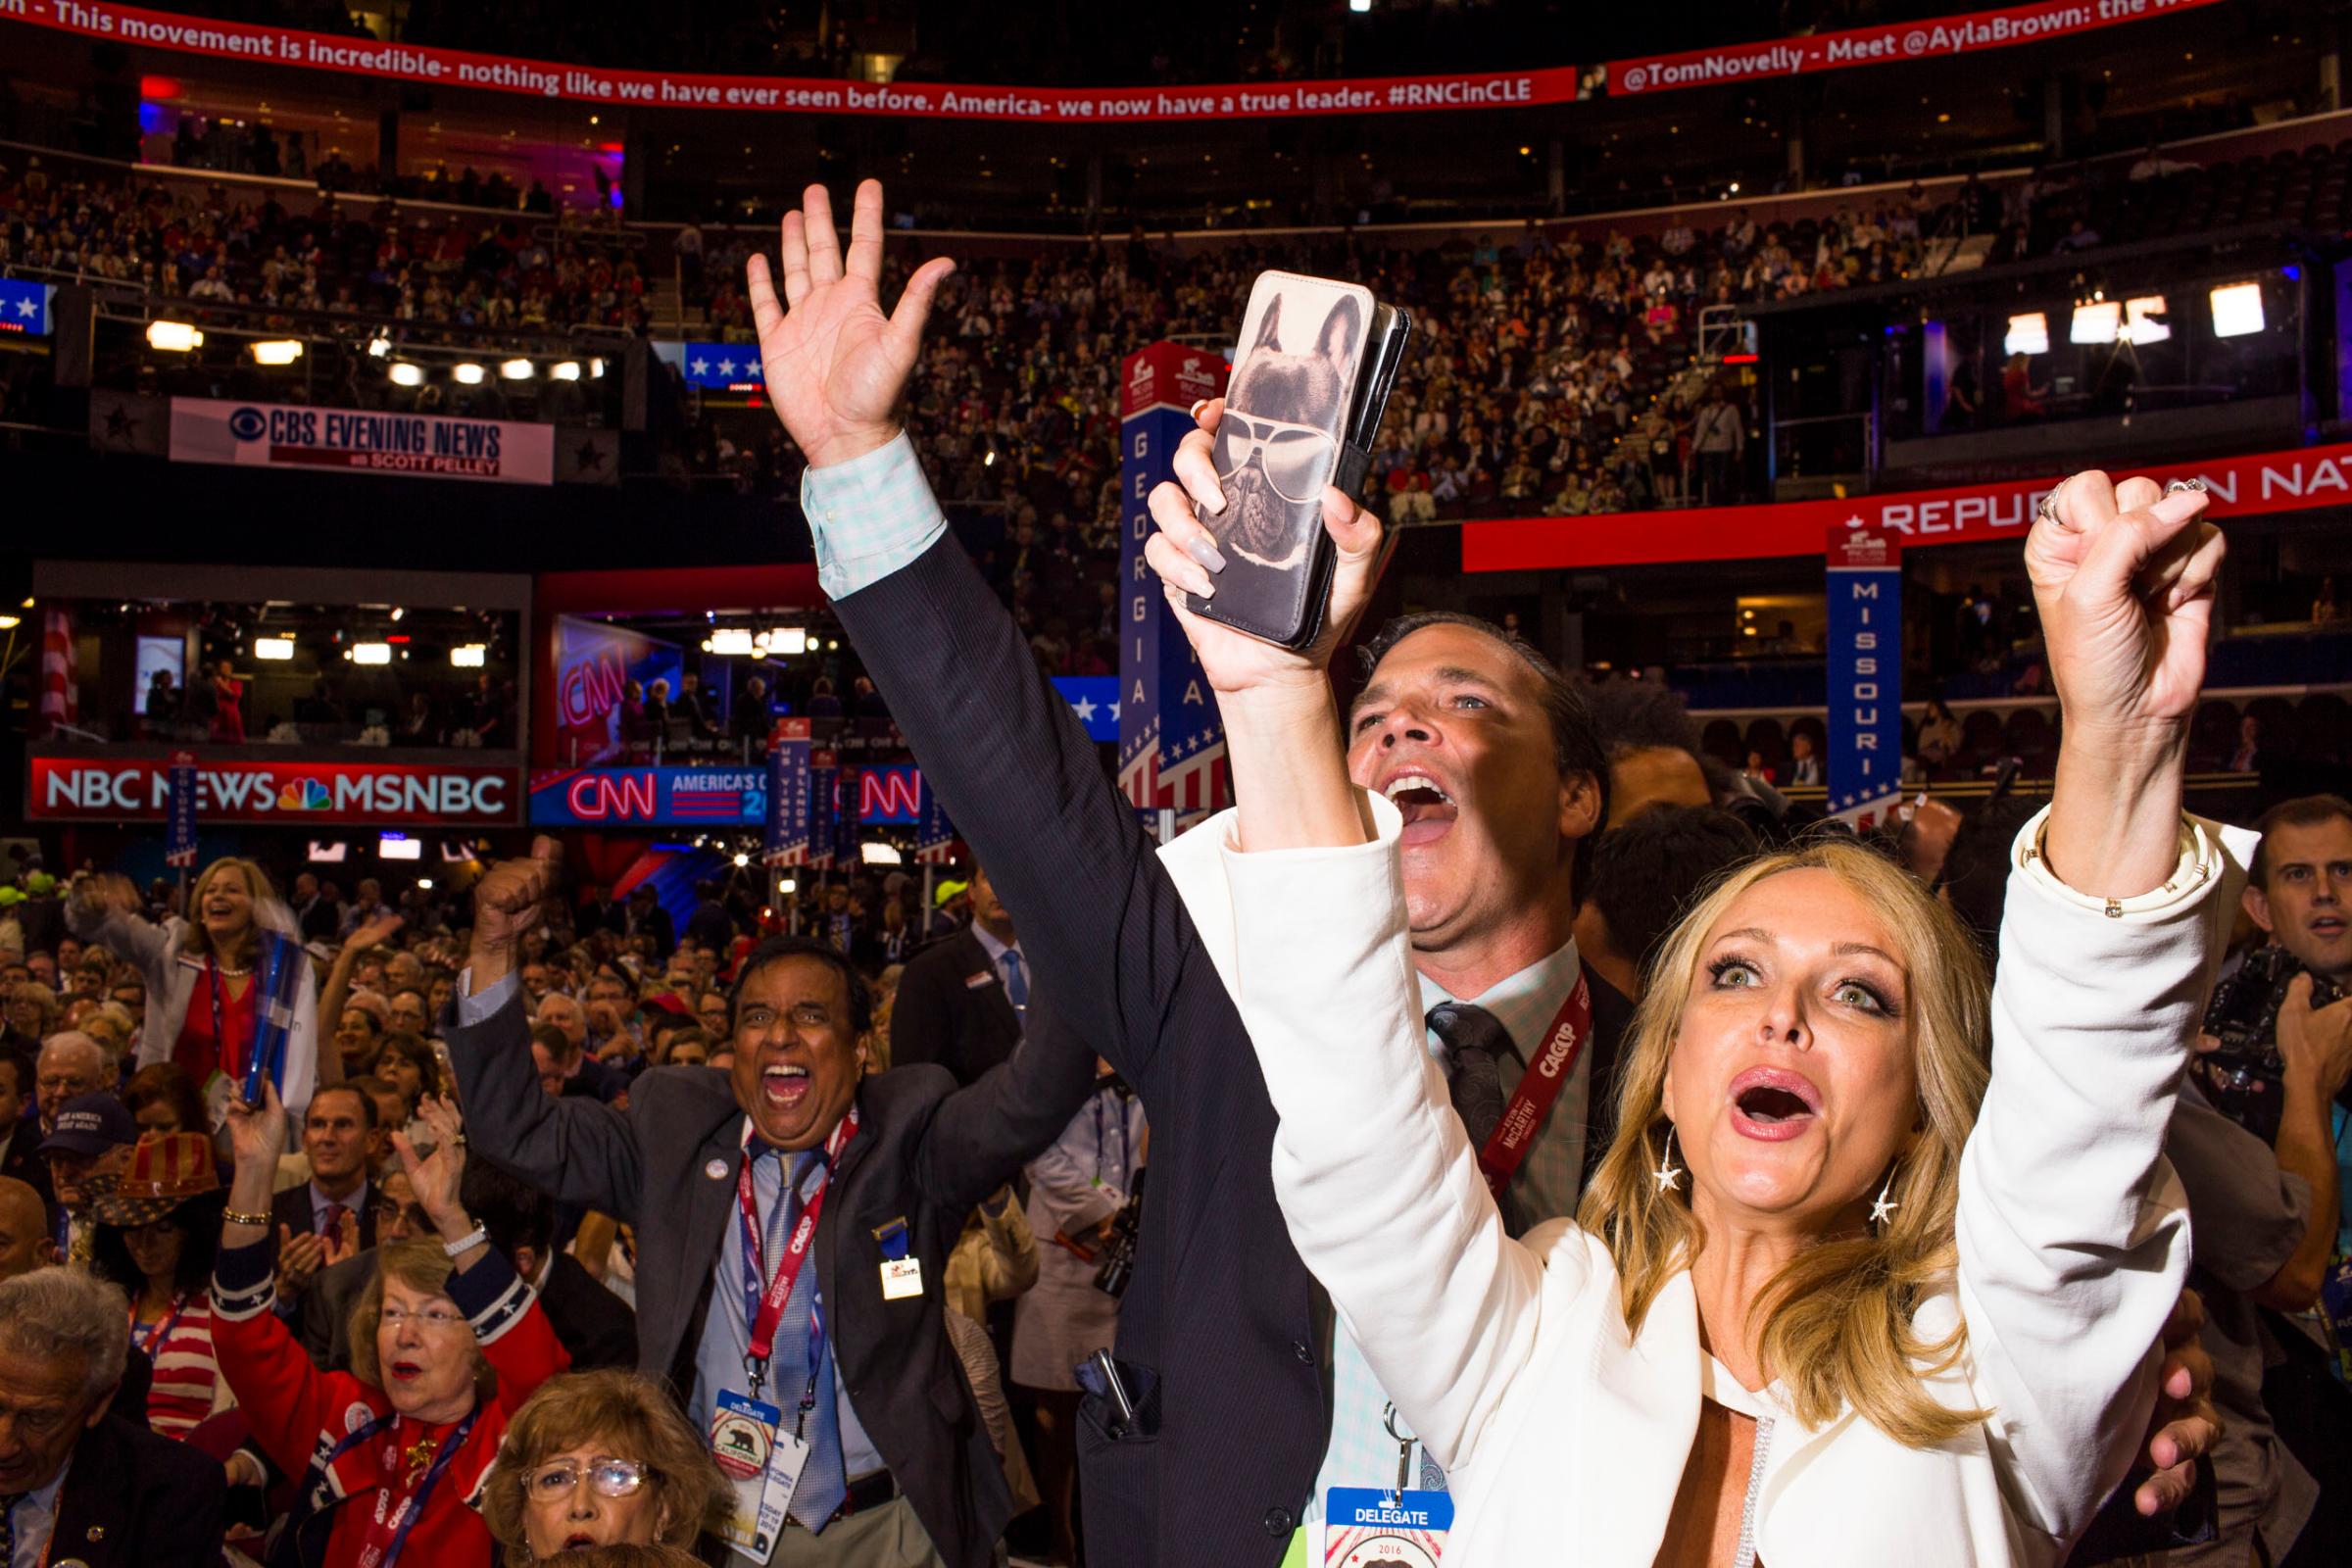 Delegates cheer at the Republican National Convention in Cleveland on Tuesday, July 19, 2016.